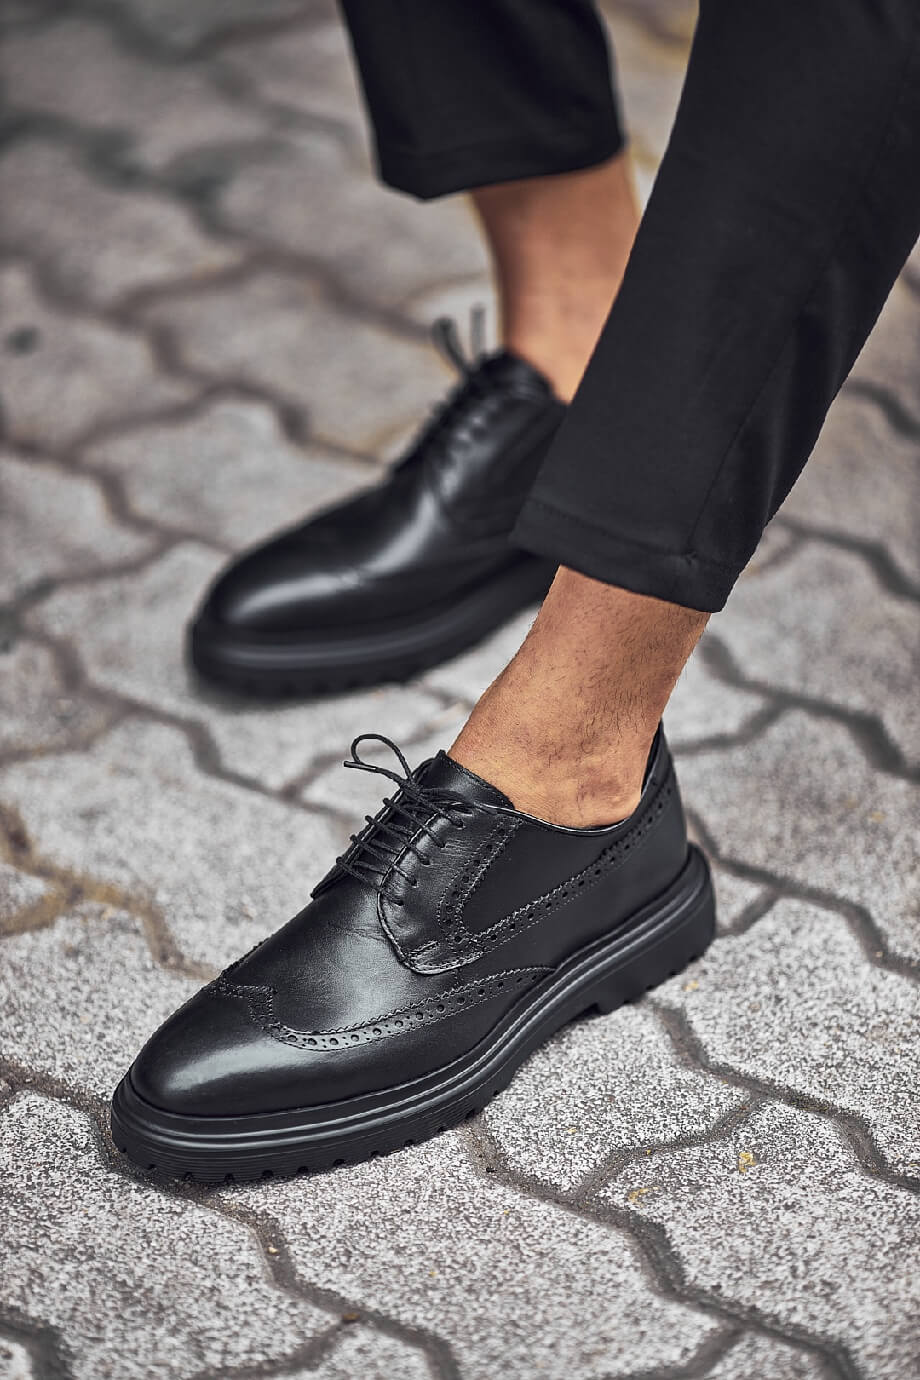 Black Brogue Derby Shoes from HolloShoe, crafted from 100% premium leather with EVA sole for all-day comfort, featuring elegant lace detail.